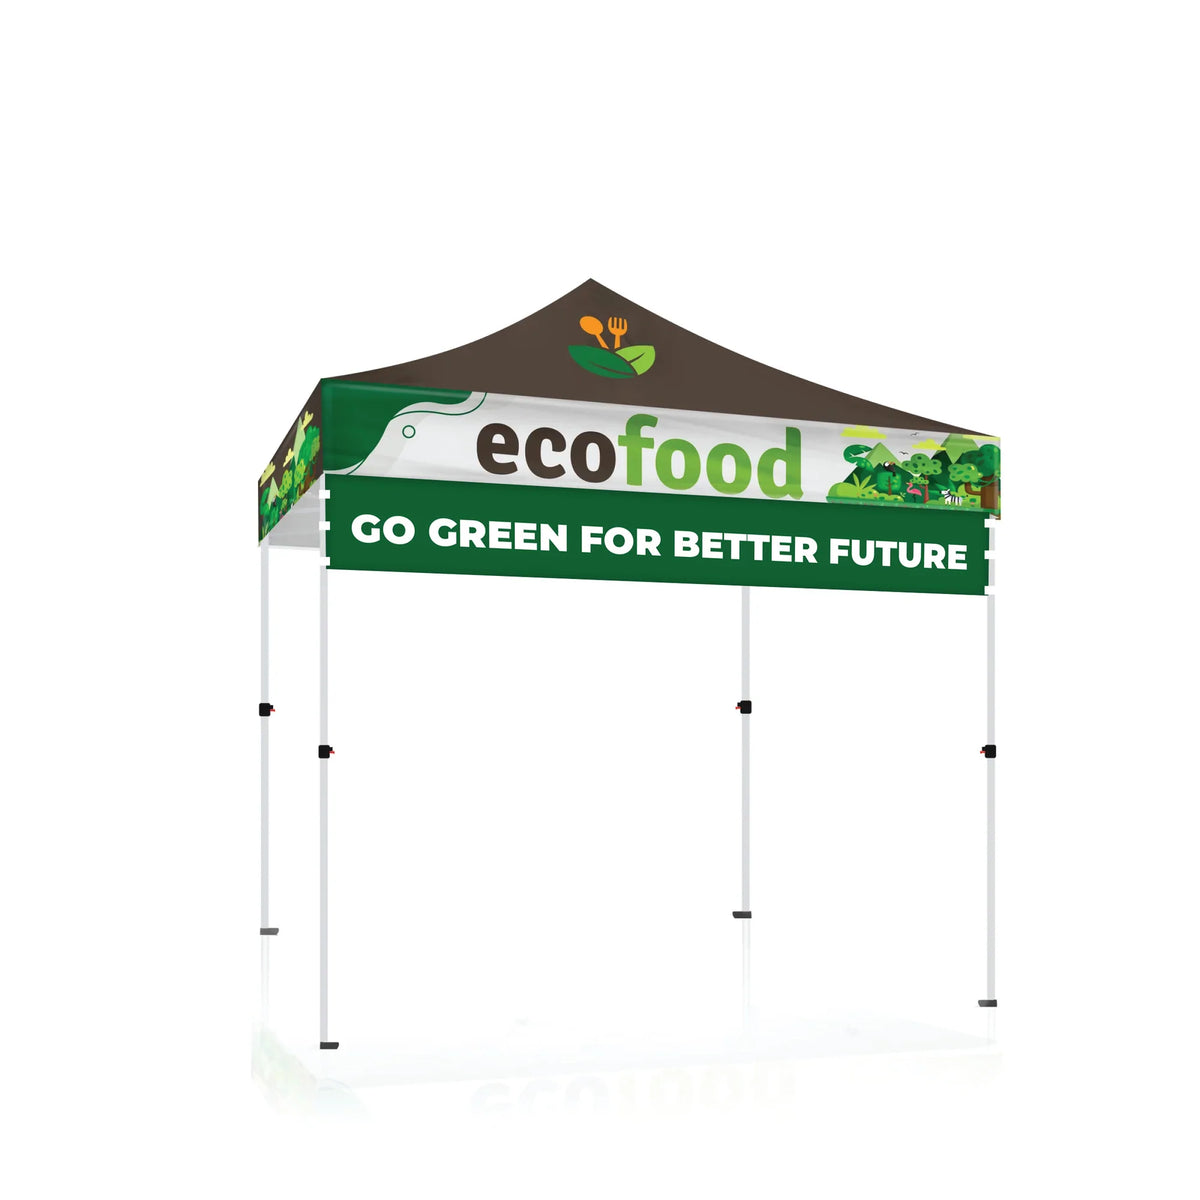 10x10 TENT VALANCE BANNER | Vu Line Direct. More Money in Your Rocket!